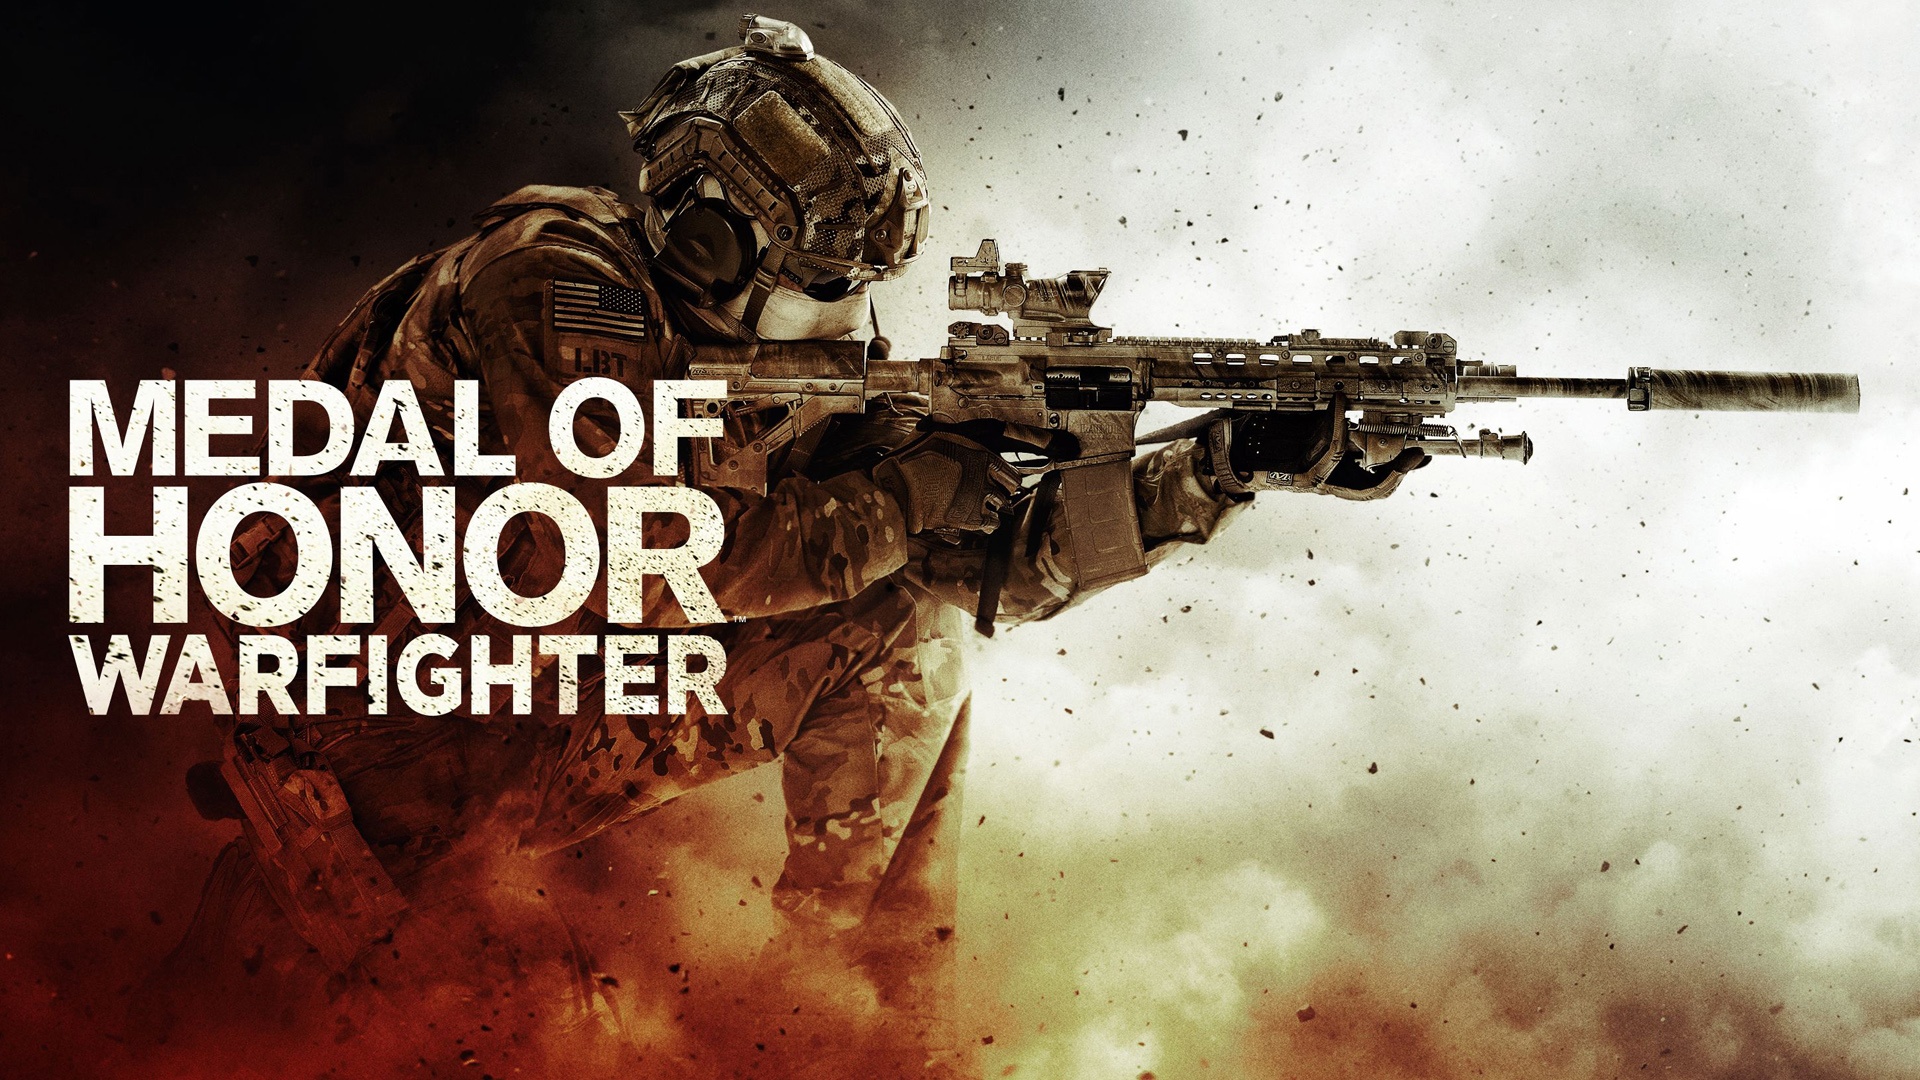 Wallpaper - Medal Of Honor Warfighter , HD Wallpaper & Backgrounds